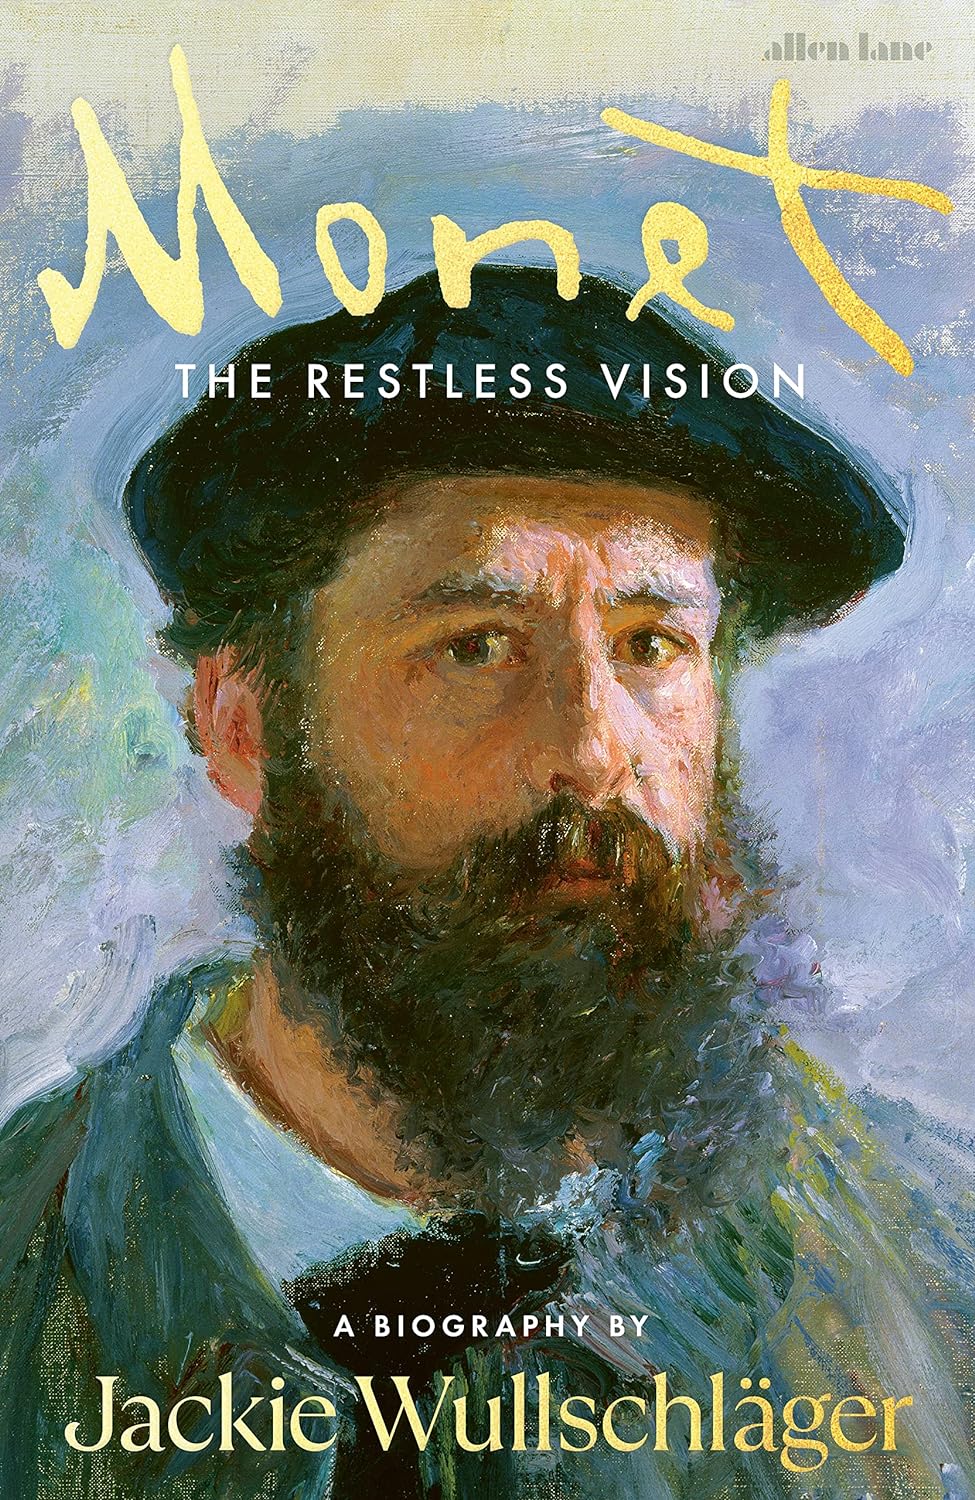 Monet: The Restless Vision by Jackie Wullschlager